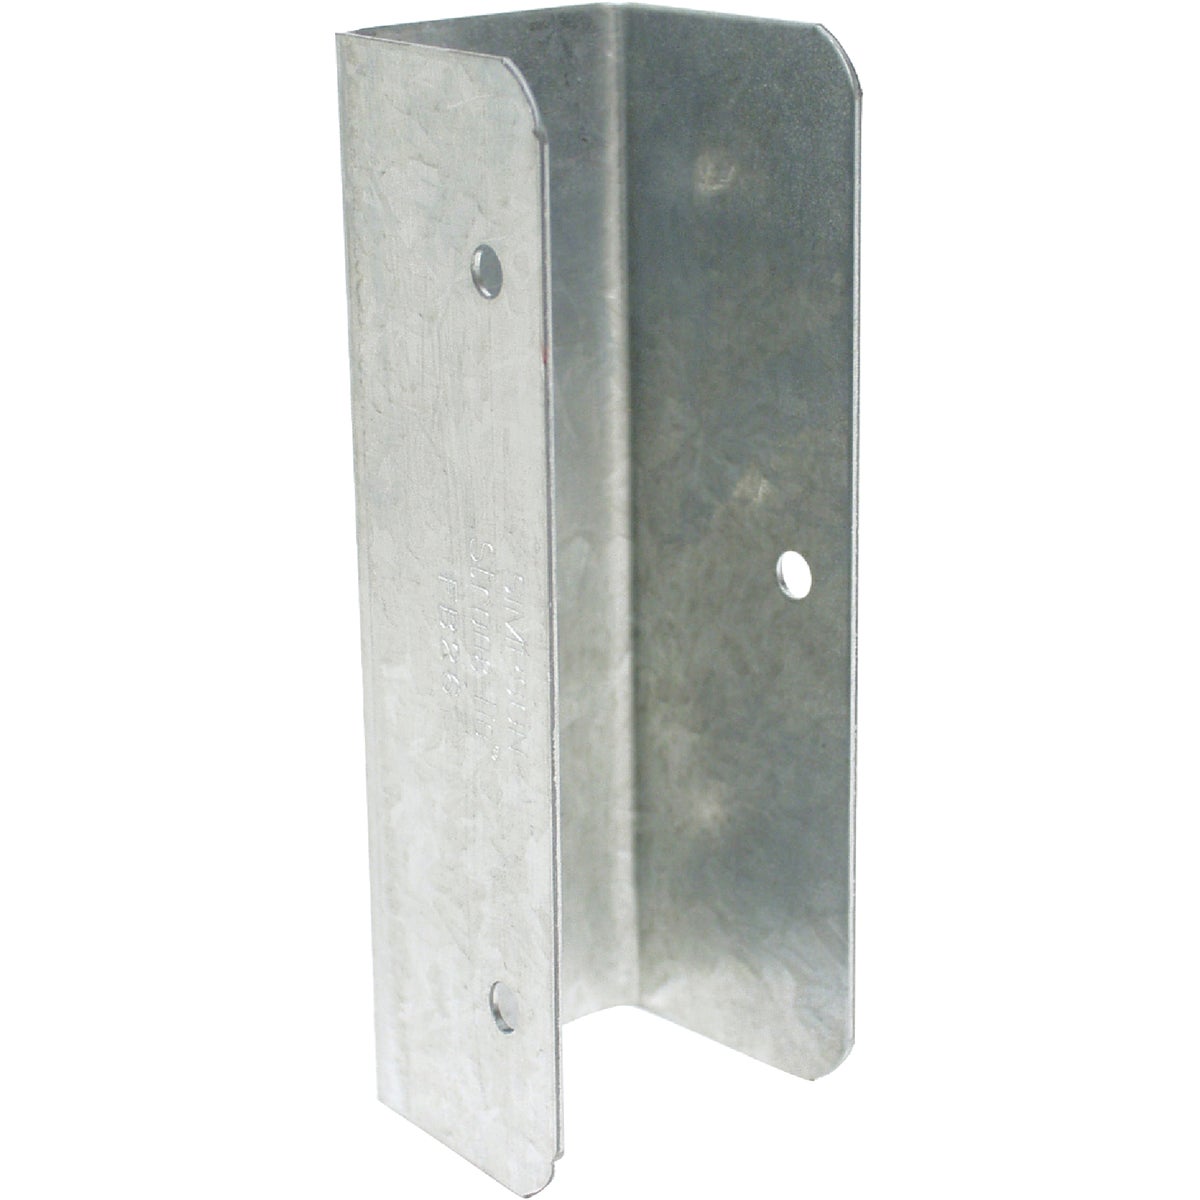 Simpson Strong-Tie FB26 Fence Bracket